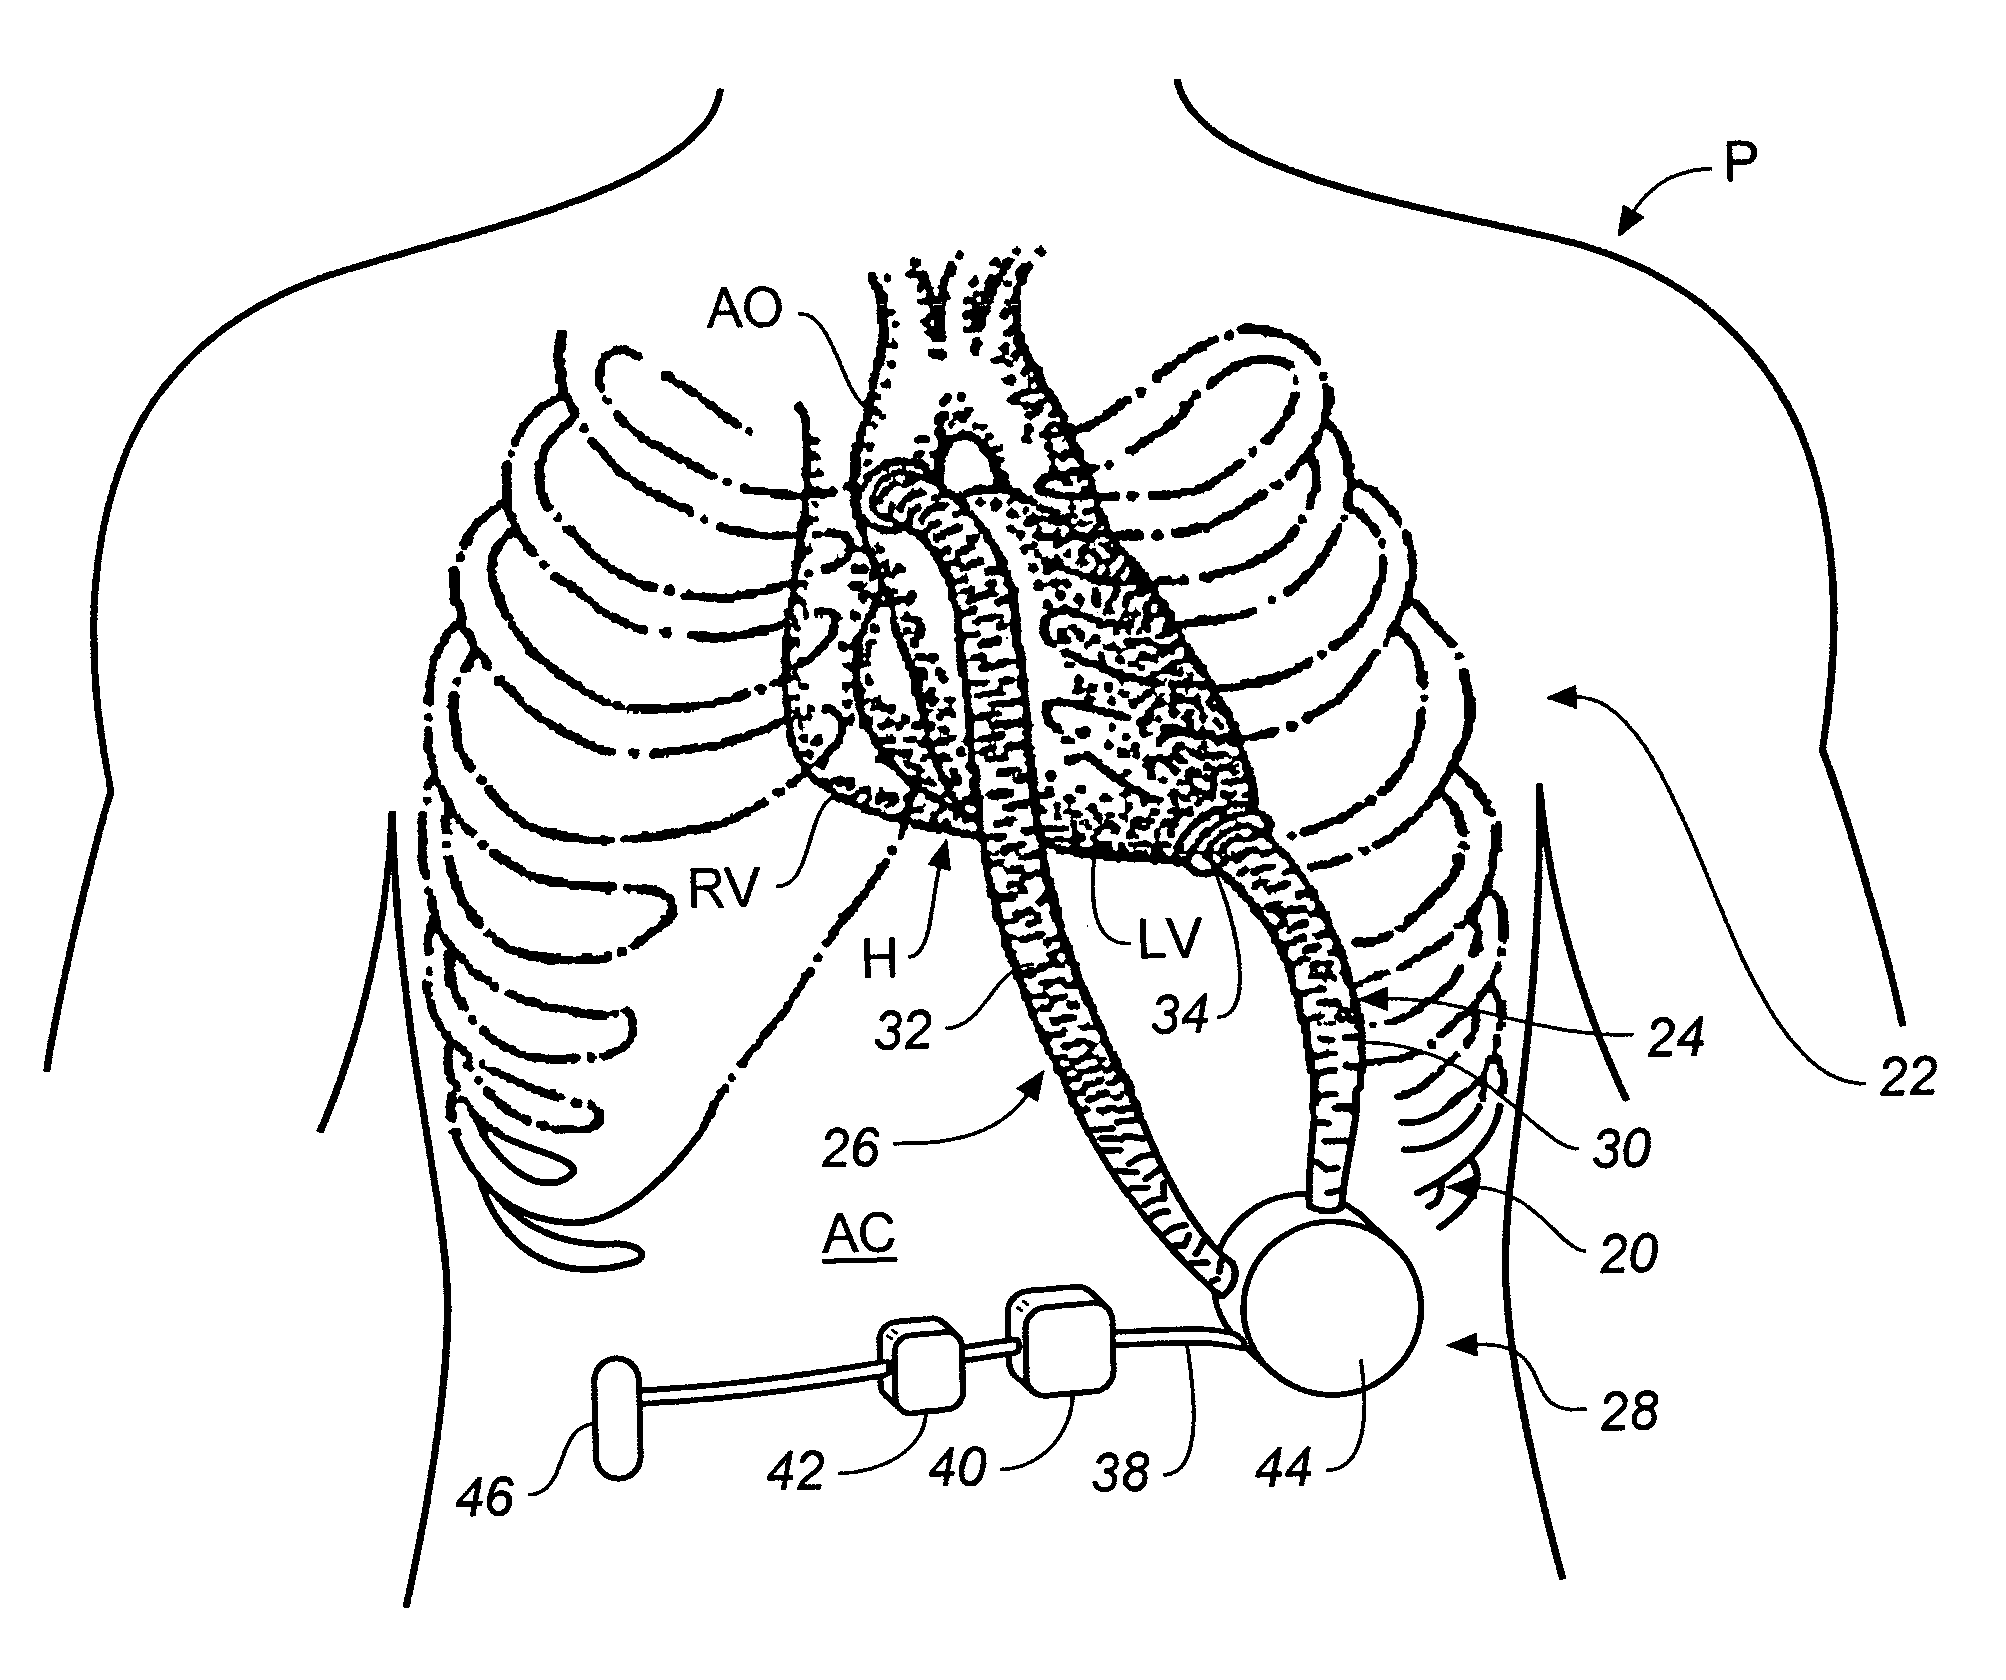 Miniature, pulsatile implantable ventricular assist devices and methods of controlling ventricular assist devices